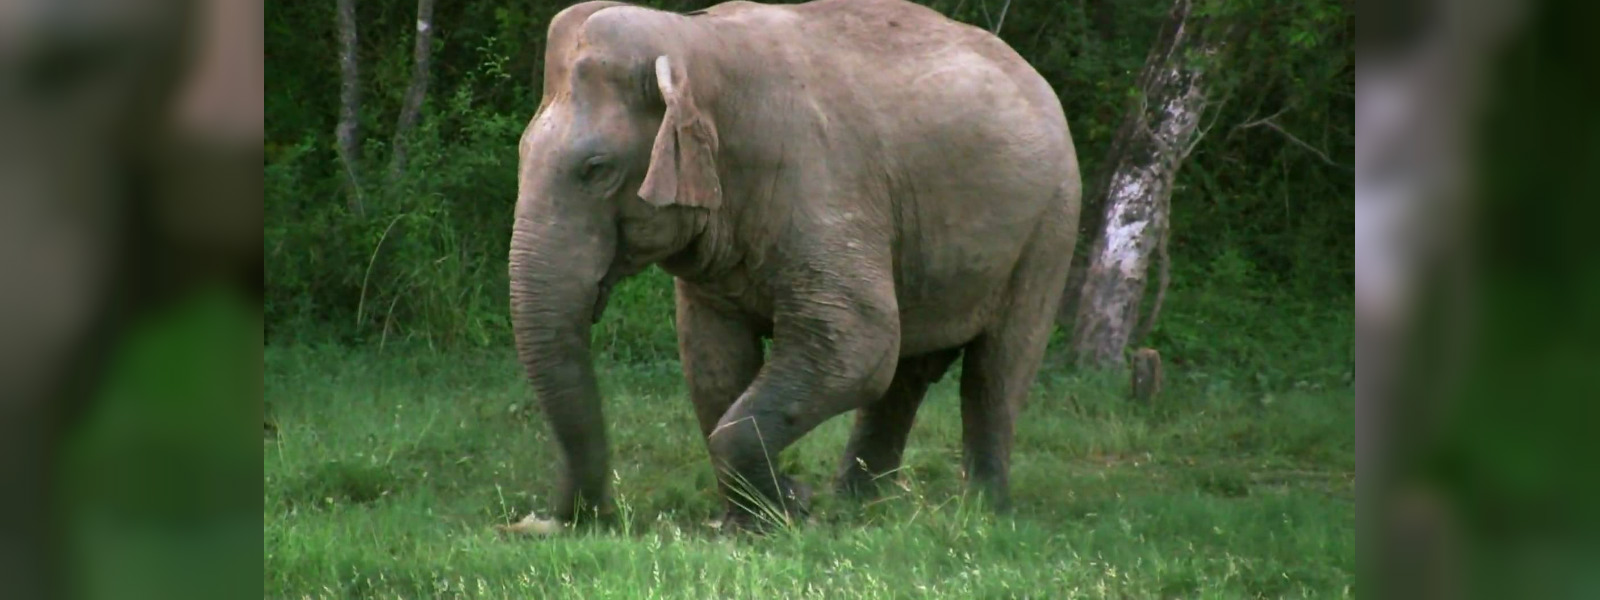 Human Elephant conflict claims a life